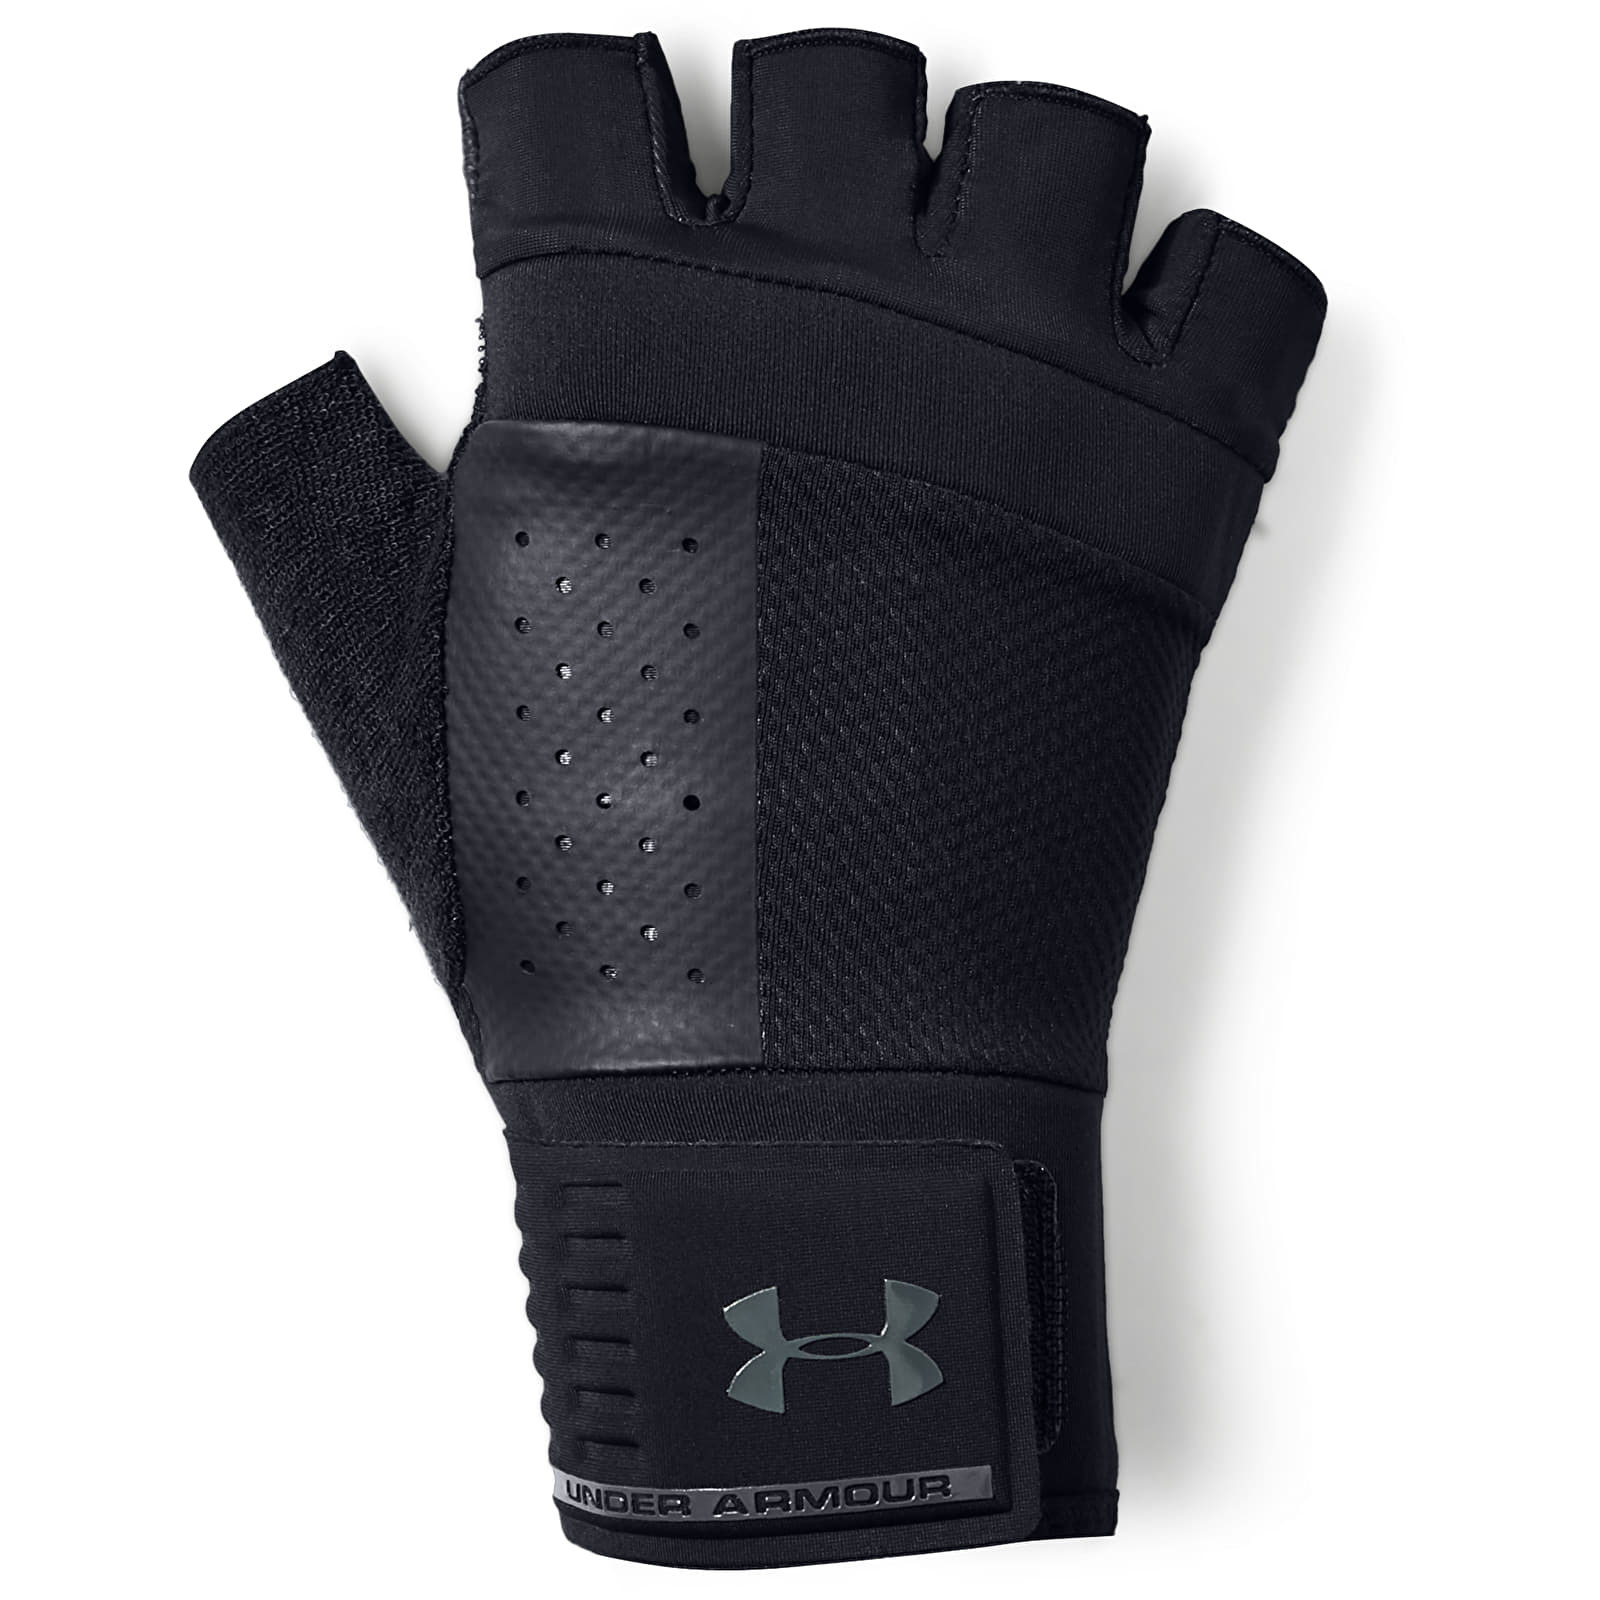 Ръкавици Under Armour Men’S Weightlifting Glove Black 902500